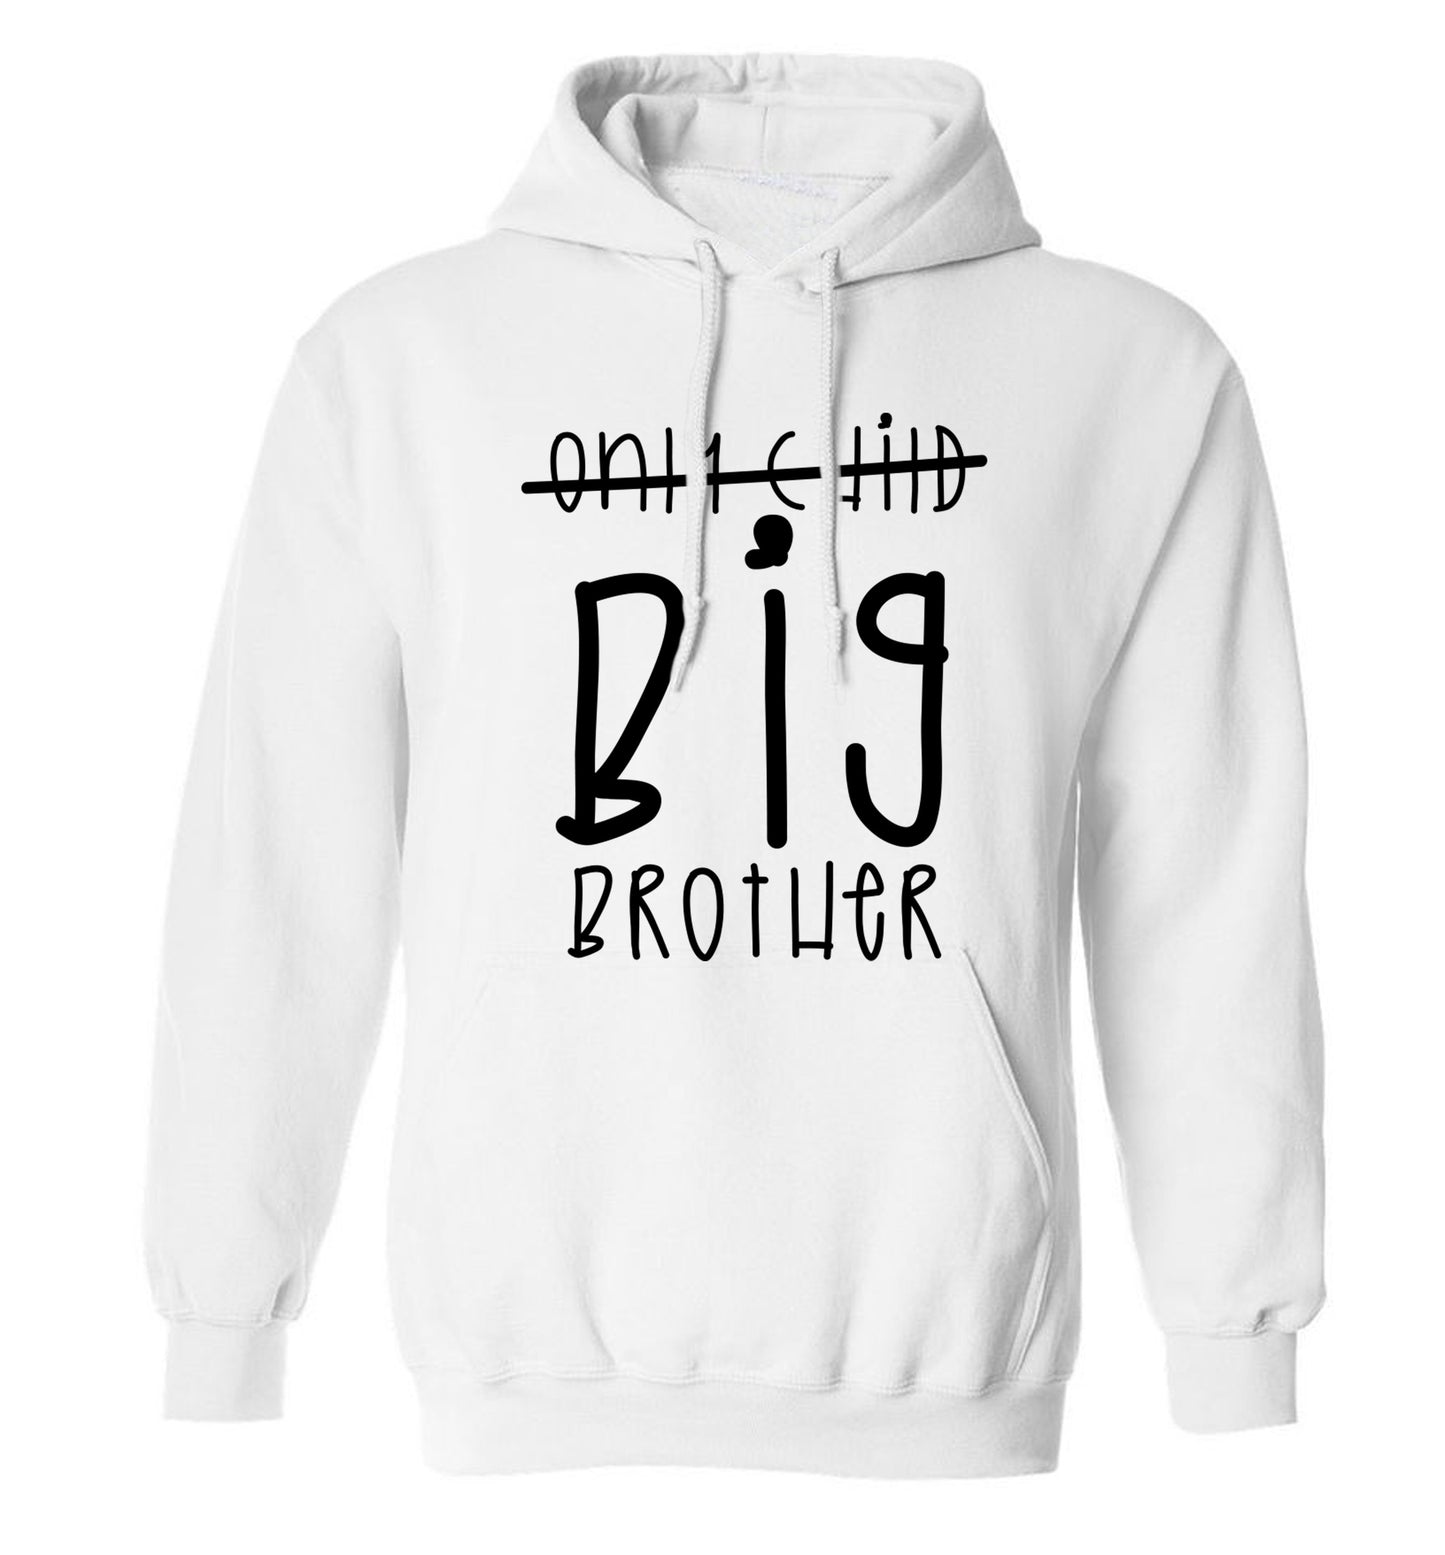 Only child big brother adults unisex white hoodie 2XL